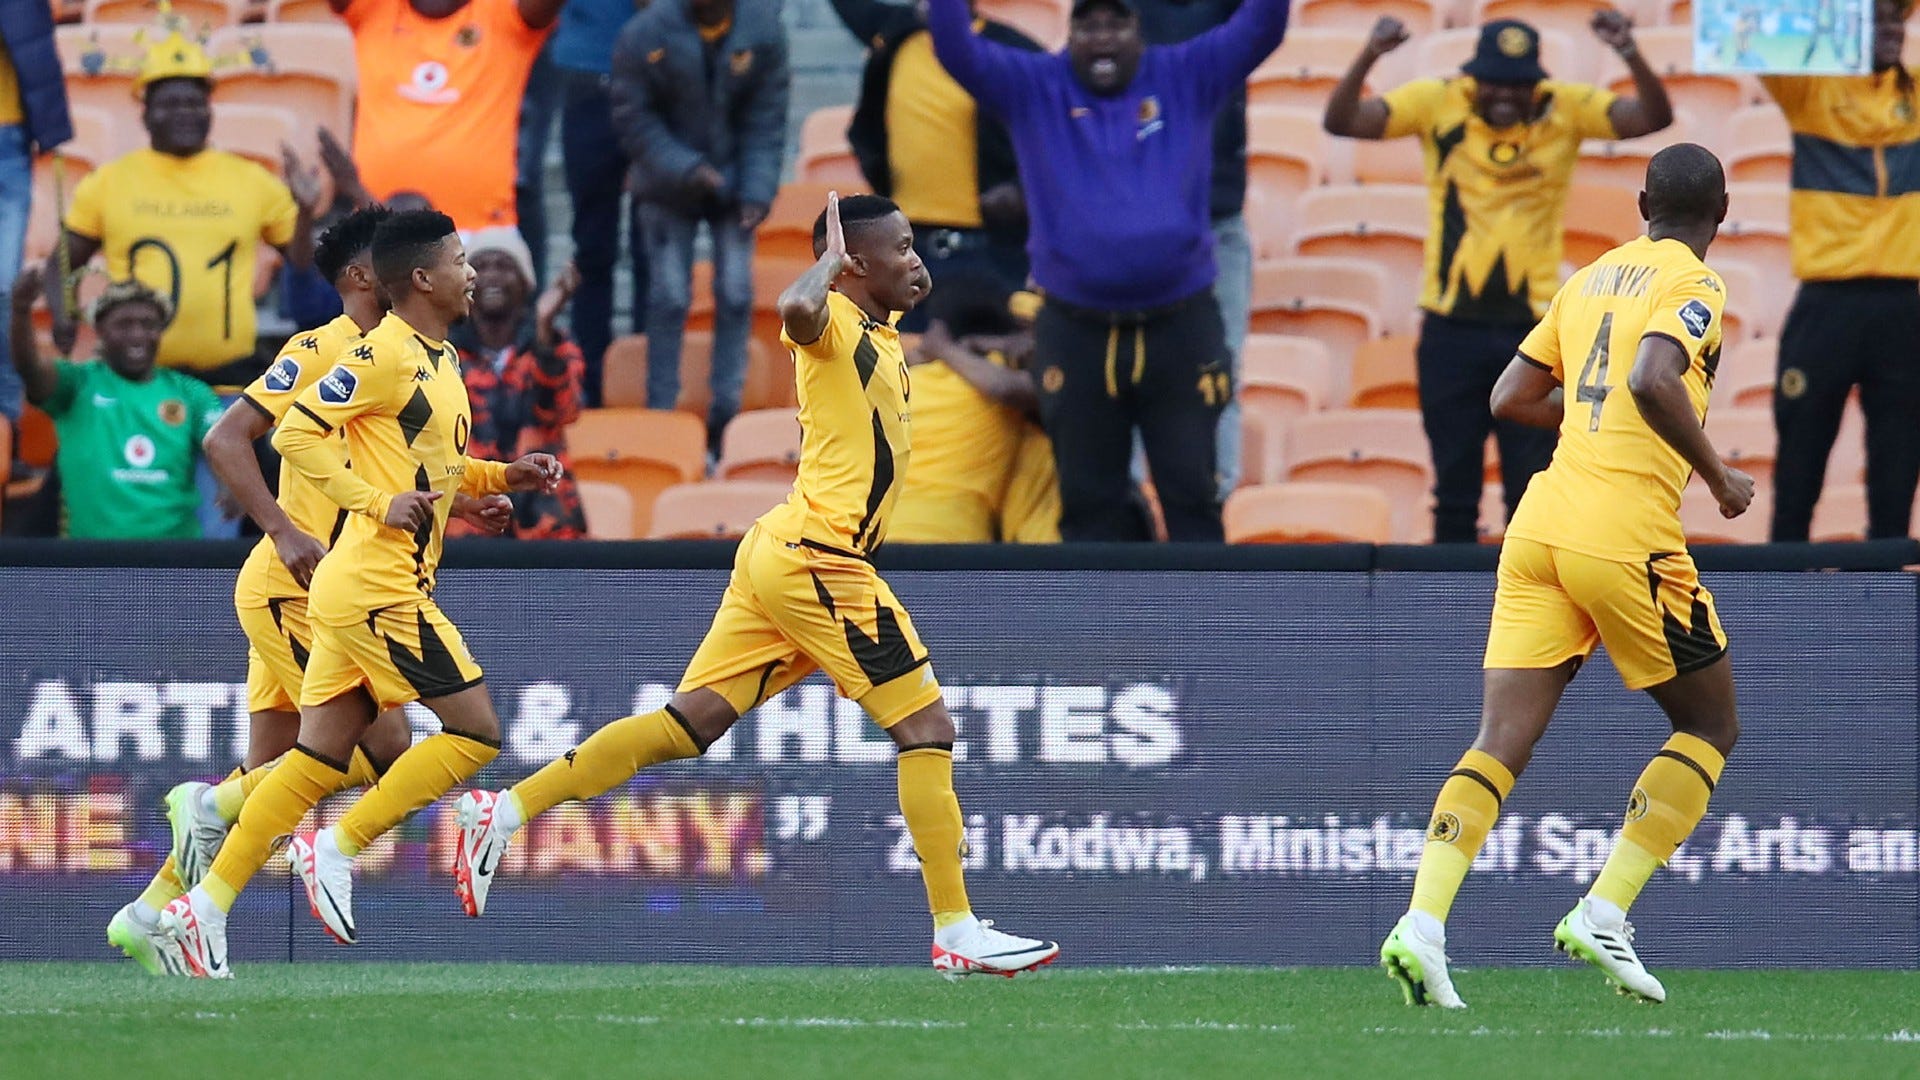 WATCH Kaizer Chiefs star Pule Mmodi scores a cracking contender for PSL Goal of the Season Goal South Africa